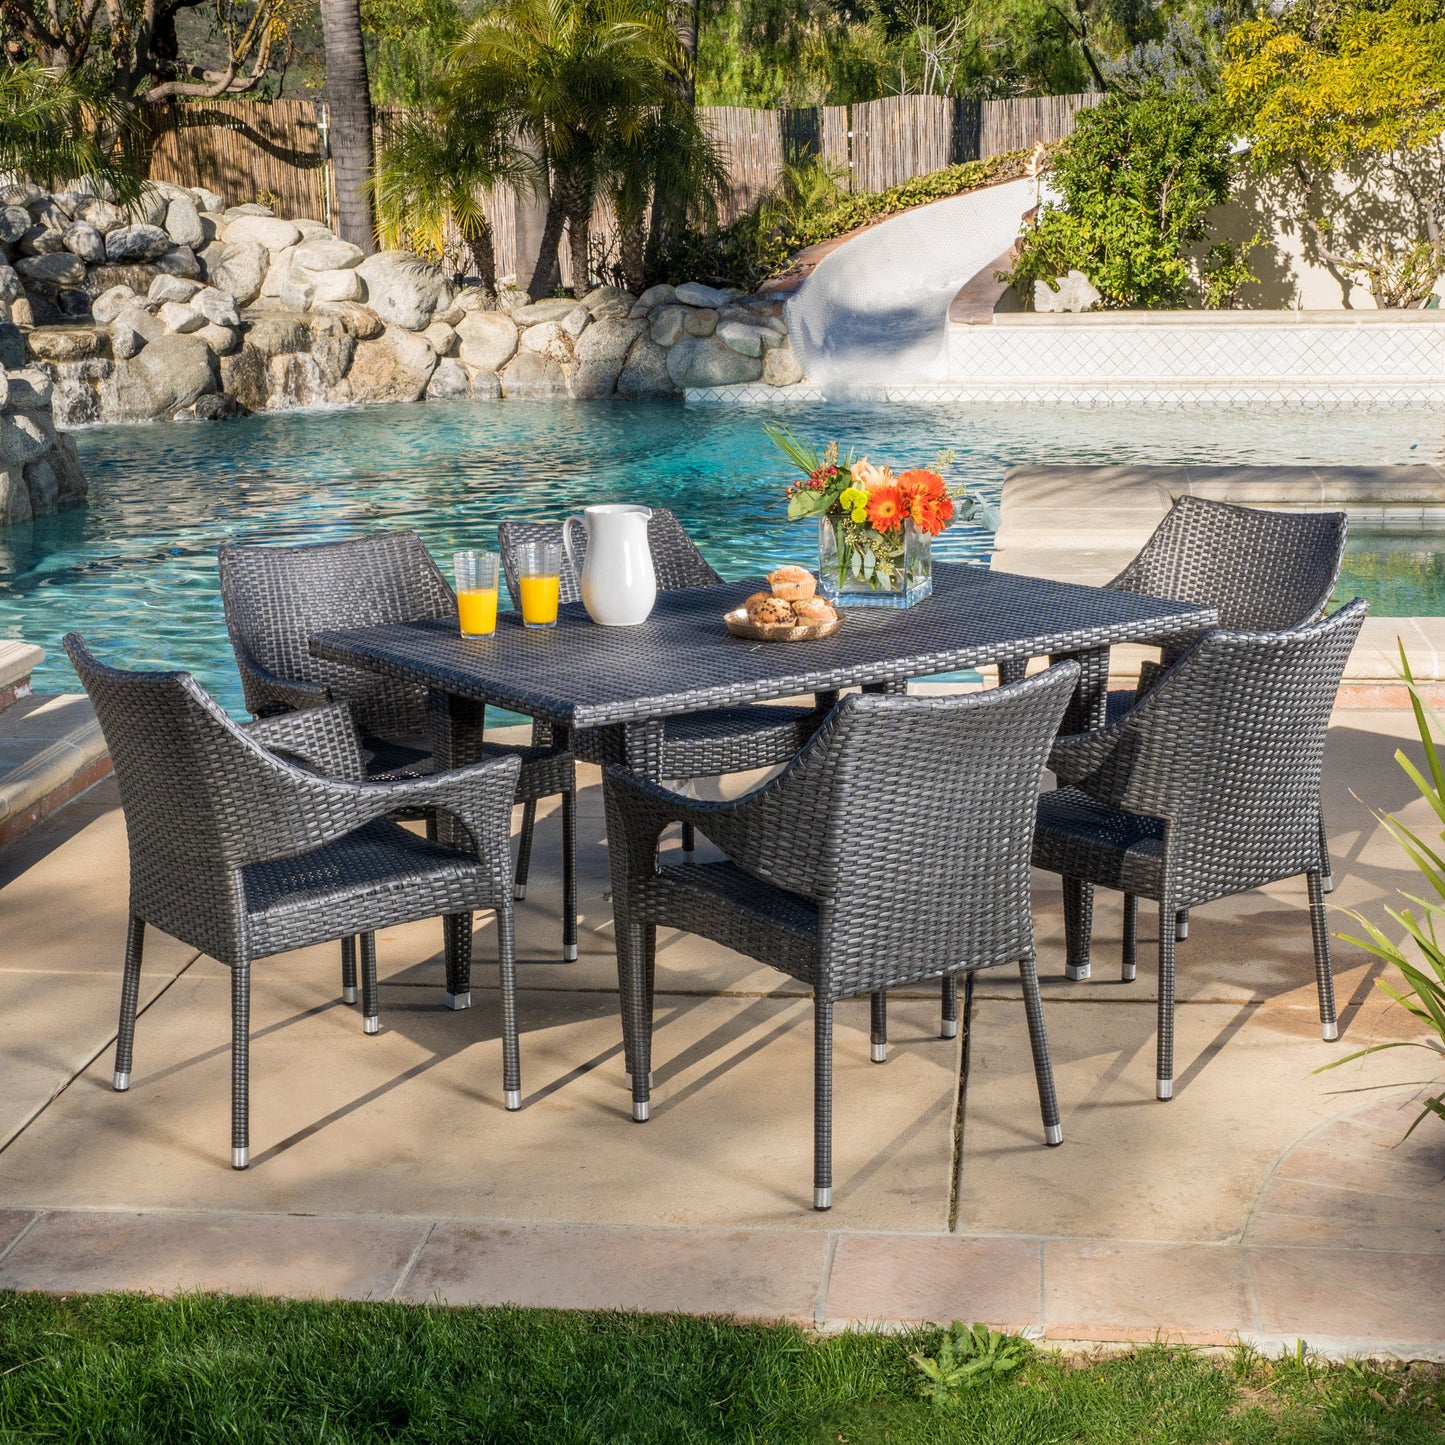 Alameda Outdoor 7-Piece Gray Wicker Dining Set with Stacking Chairs